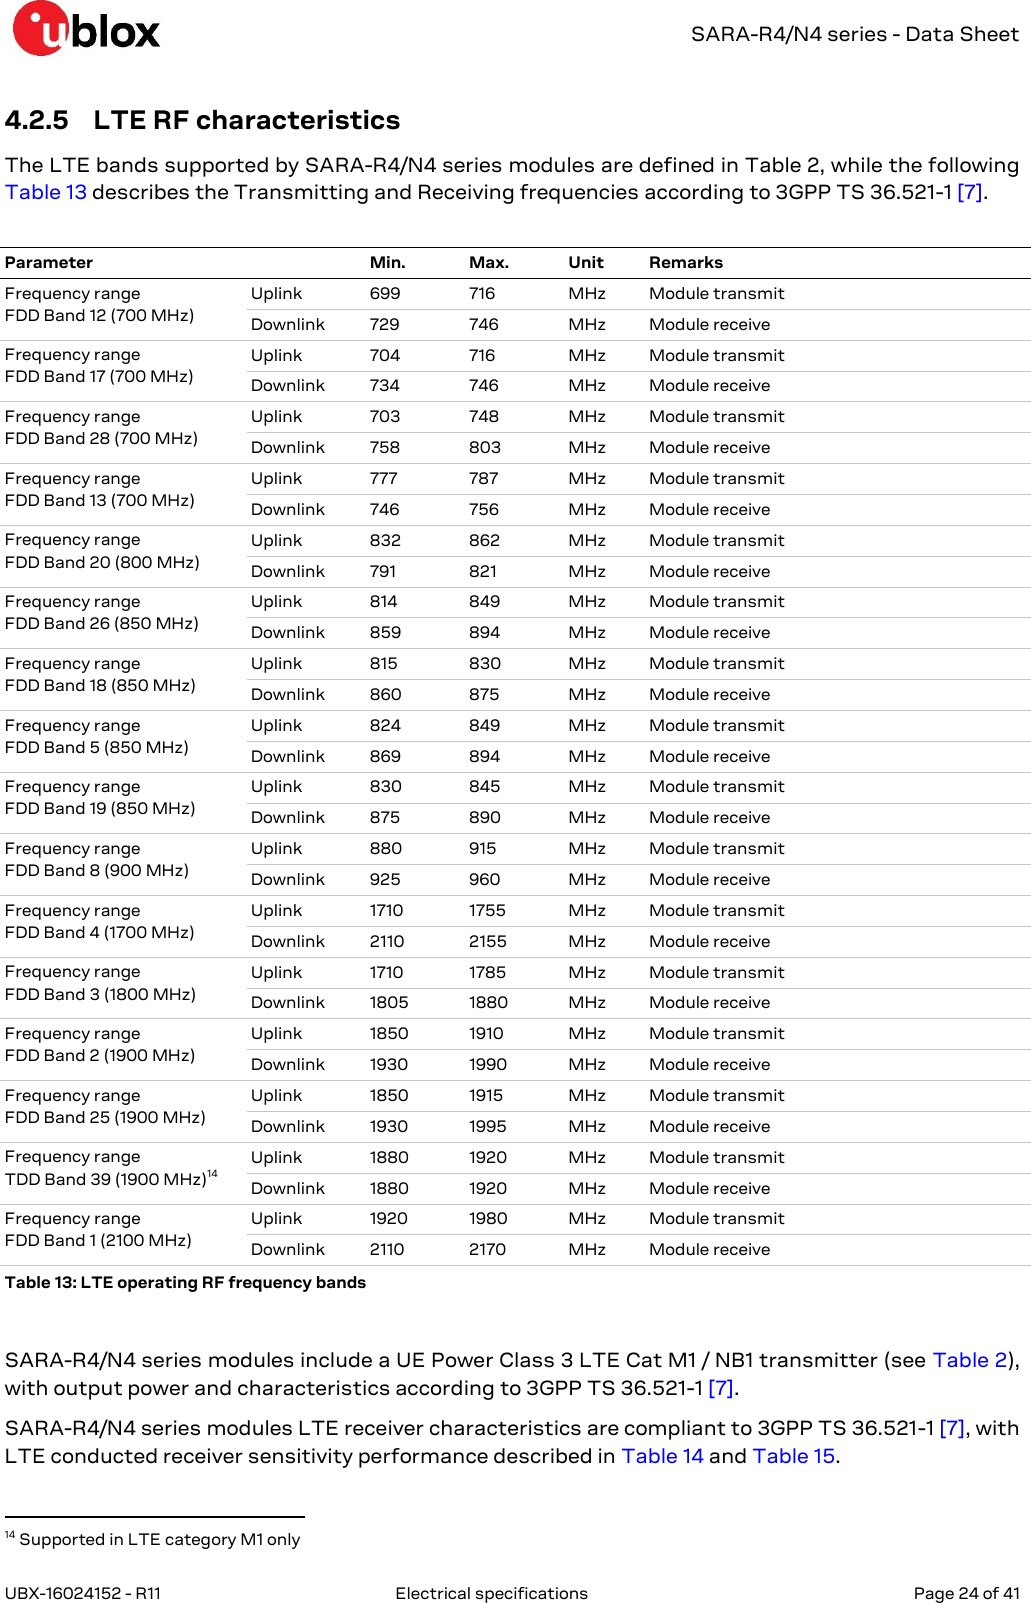   SARA-R4/N4 series - Data Sheet UBX-16024152 - R11  Electrical specifications   Page 24 of 41      4.2.5 LTE RF characteristics The LTE bands supported by SARA-R4/N4 series modules are defined in Table 2, while the following Table 13 describes the Transmitting and Receiving frequencies according to 3GPP TS 36.521-1 [7].  Parameter   Min.  Max. Unit Remarks Frequency range FDD Band 12 (700 MHz) Uplink 699 716 MHz Module transmit Downlink 729 746 MHz Module receive Frequency range FDD Band 17 (700 MHz) Uplink 704 716 MHz Module transmit Downlink 734 746 MHz Module receive Frequency range FDD Band 28 (700 MHz) Uplink 703 748 MHz Module transmit Downlink 758 803 MHz Module receive Frequency range FDD Band 13 (700 MHz) Uplink 777 787 MHz Module transmit Downlink 746 756 MHz Module receive Frequency range FDD Band 20 (800 MHz) Uplink 832 862 MHz Module transmit Downlink 791 821 MHz Module receive Frequency range FDD Band 26 (850 MHz) Uplink 814 849 MHz Module transmit Downlink 859 894 MHz Module receive Frequency range FDD Band 18 (850 MHz) Uplink 815 830 MHz Module transmit Downlink 860 875 MHz Module receive Frequency range FDD Band 5 (850 MHz) Uplink 824 849 MHz Module transmit Downlink 869 894 MHz Module receive Frequency range FDD Band 19 (850 MHz) Uplink 830 845 MHz Module transmit Downlink 875 890 MHz Module receive Frequency range FDD Band 8 (900 MHz) Uplink 880 915 MHz Module transmit Downlink 925 960 MHz Module receive Frequency range FDD Band 4 (1700 MHz) Uplink 1710 1755 MHz Module transmit Downlink 2110 2155 MHz Module receive Frequency range FDD Band 3 (1800 MHz) Uplink 1710 1785 MHz Module transmit Downlink 1805 1880 MHz Module receive Frequency range FDD Band 2 (1900 MHz) Uplink 1850 1910 MHz Module transmit Downlink 1930 1990 MHz Module receive Frequency range FDD Band 25 (1900 MHz) Uplink 1850 1915 MHz Module transmit Downlink 1930 1995 MHz Module receive Frequency range TDD Band 39 (1900 MHz)14 Uplink 1880 1920 MHz Module transmit Downlink 1880 1920 MHz Module receive Frequency range FDD Band 1 (2100 MHz) Uplink 1920 1980 MHz Module transmit Downlink 2110 2170 MHz Module receive Table 13: LTE operating RF frequency bands  SARA-R4/N4 series modules include a UE Power Class 3 LTE Cat M1 / NB1 transmitter (see Table 2), with output power and characteristics according to 3GPP TS 36.521-1 [7]. SARA-R4/N4 series modules LTE receiver characteristics are compliant to 3GPP TS 36.521-1 [7], with LTE conducted receiver sensitivity performance described in Table 14 and Table 15.                                                                  14 Supported in LTE category M1 only 